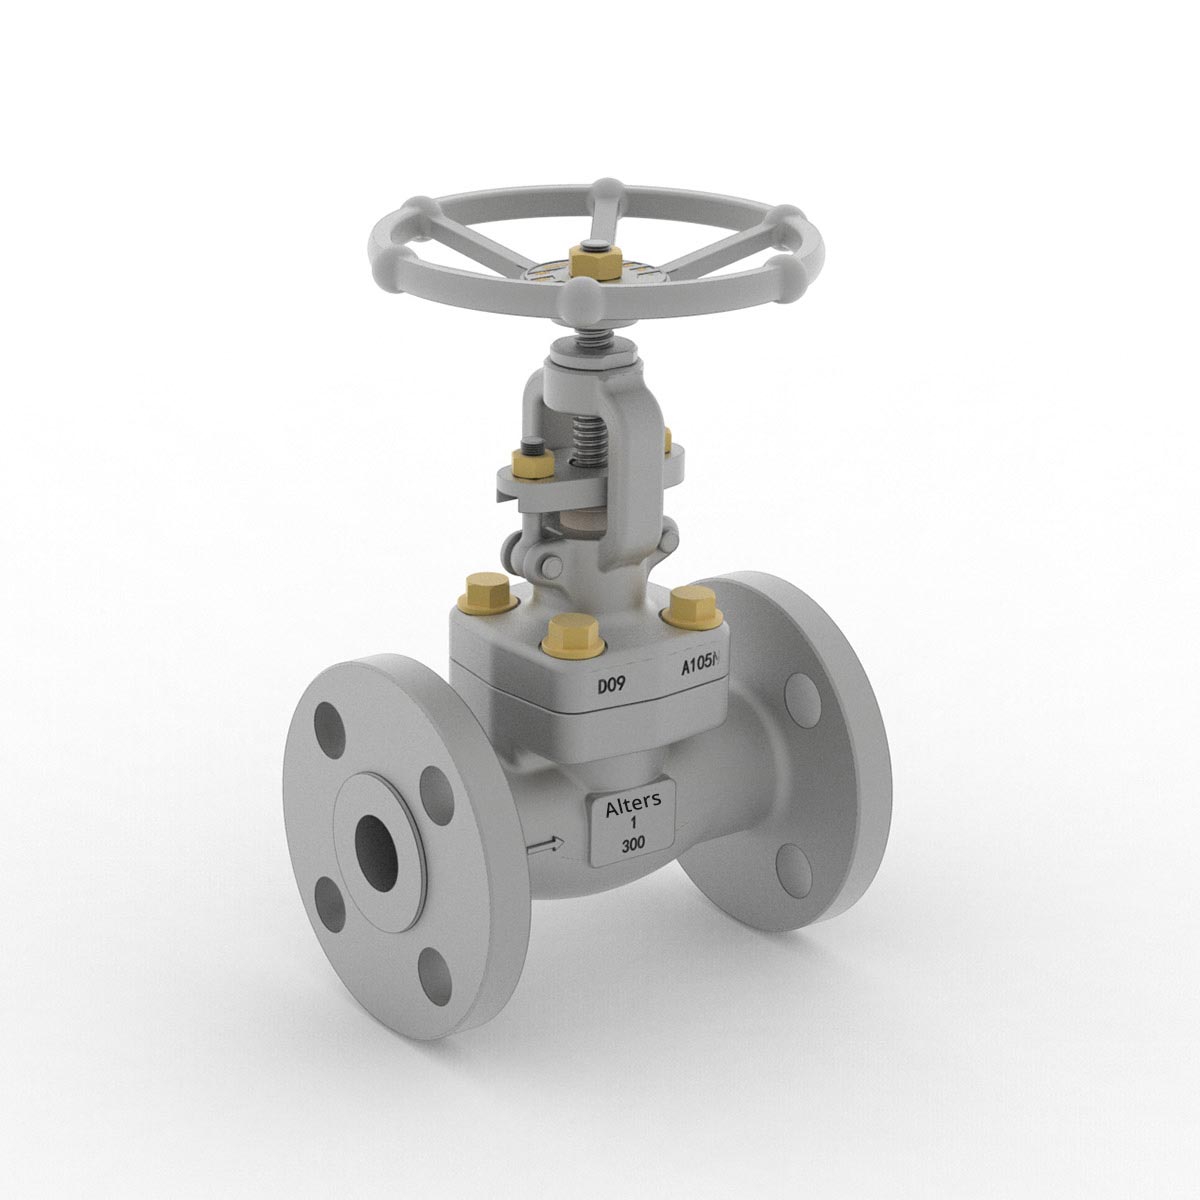 Image of a Forged Steel Globe Valve Flange from AlterValve with the company name and specifications.